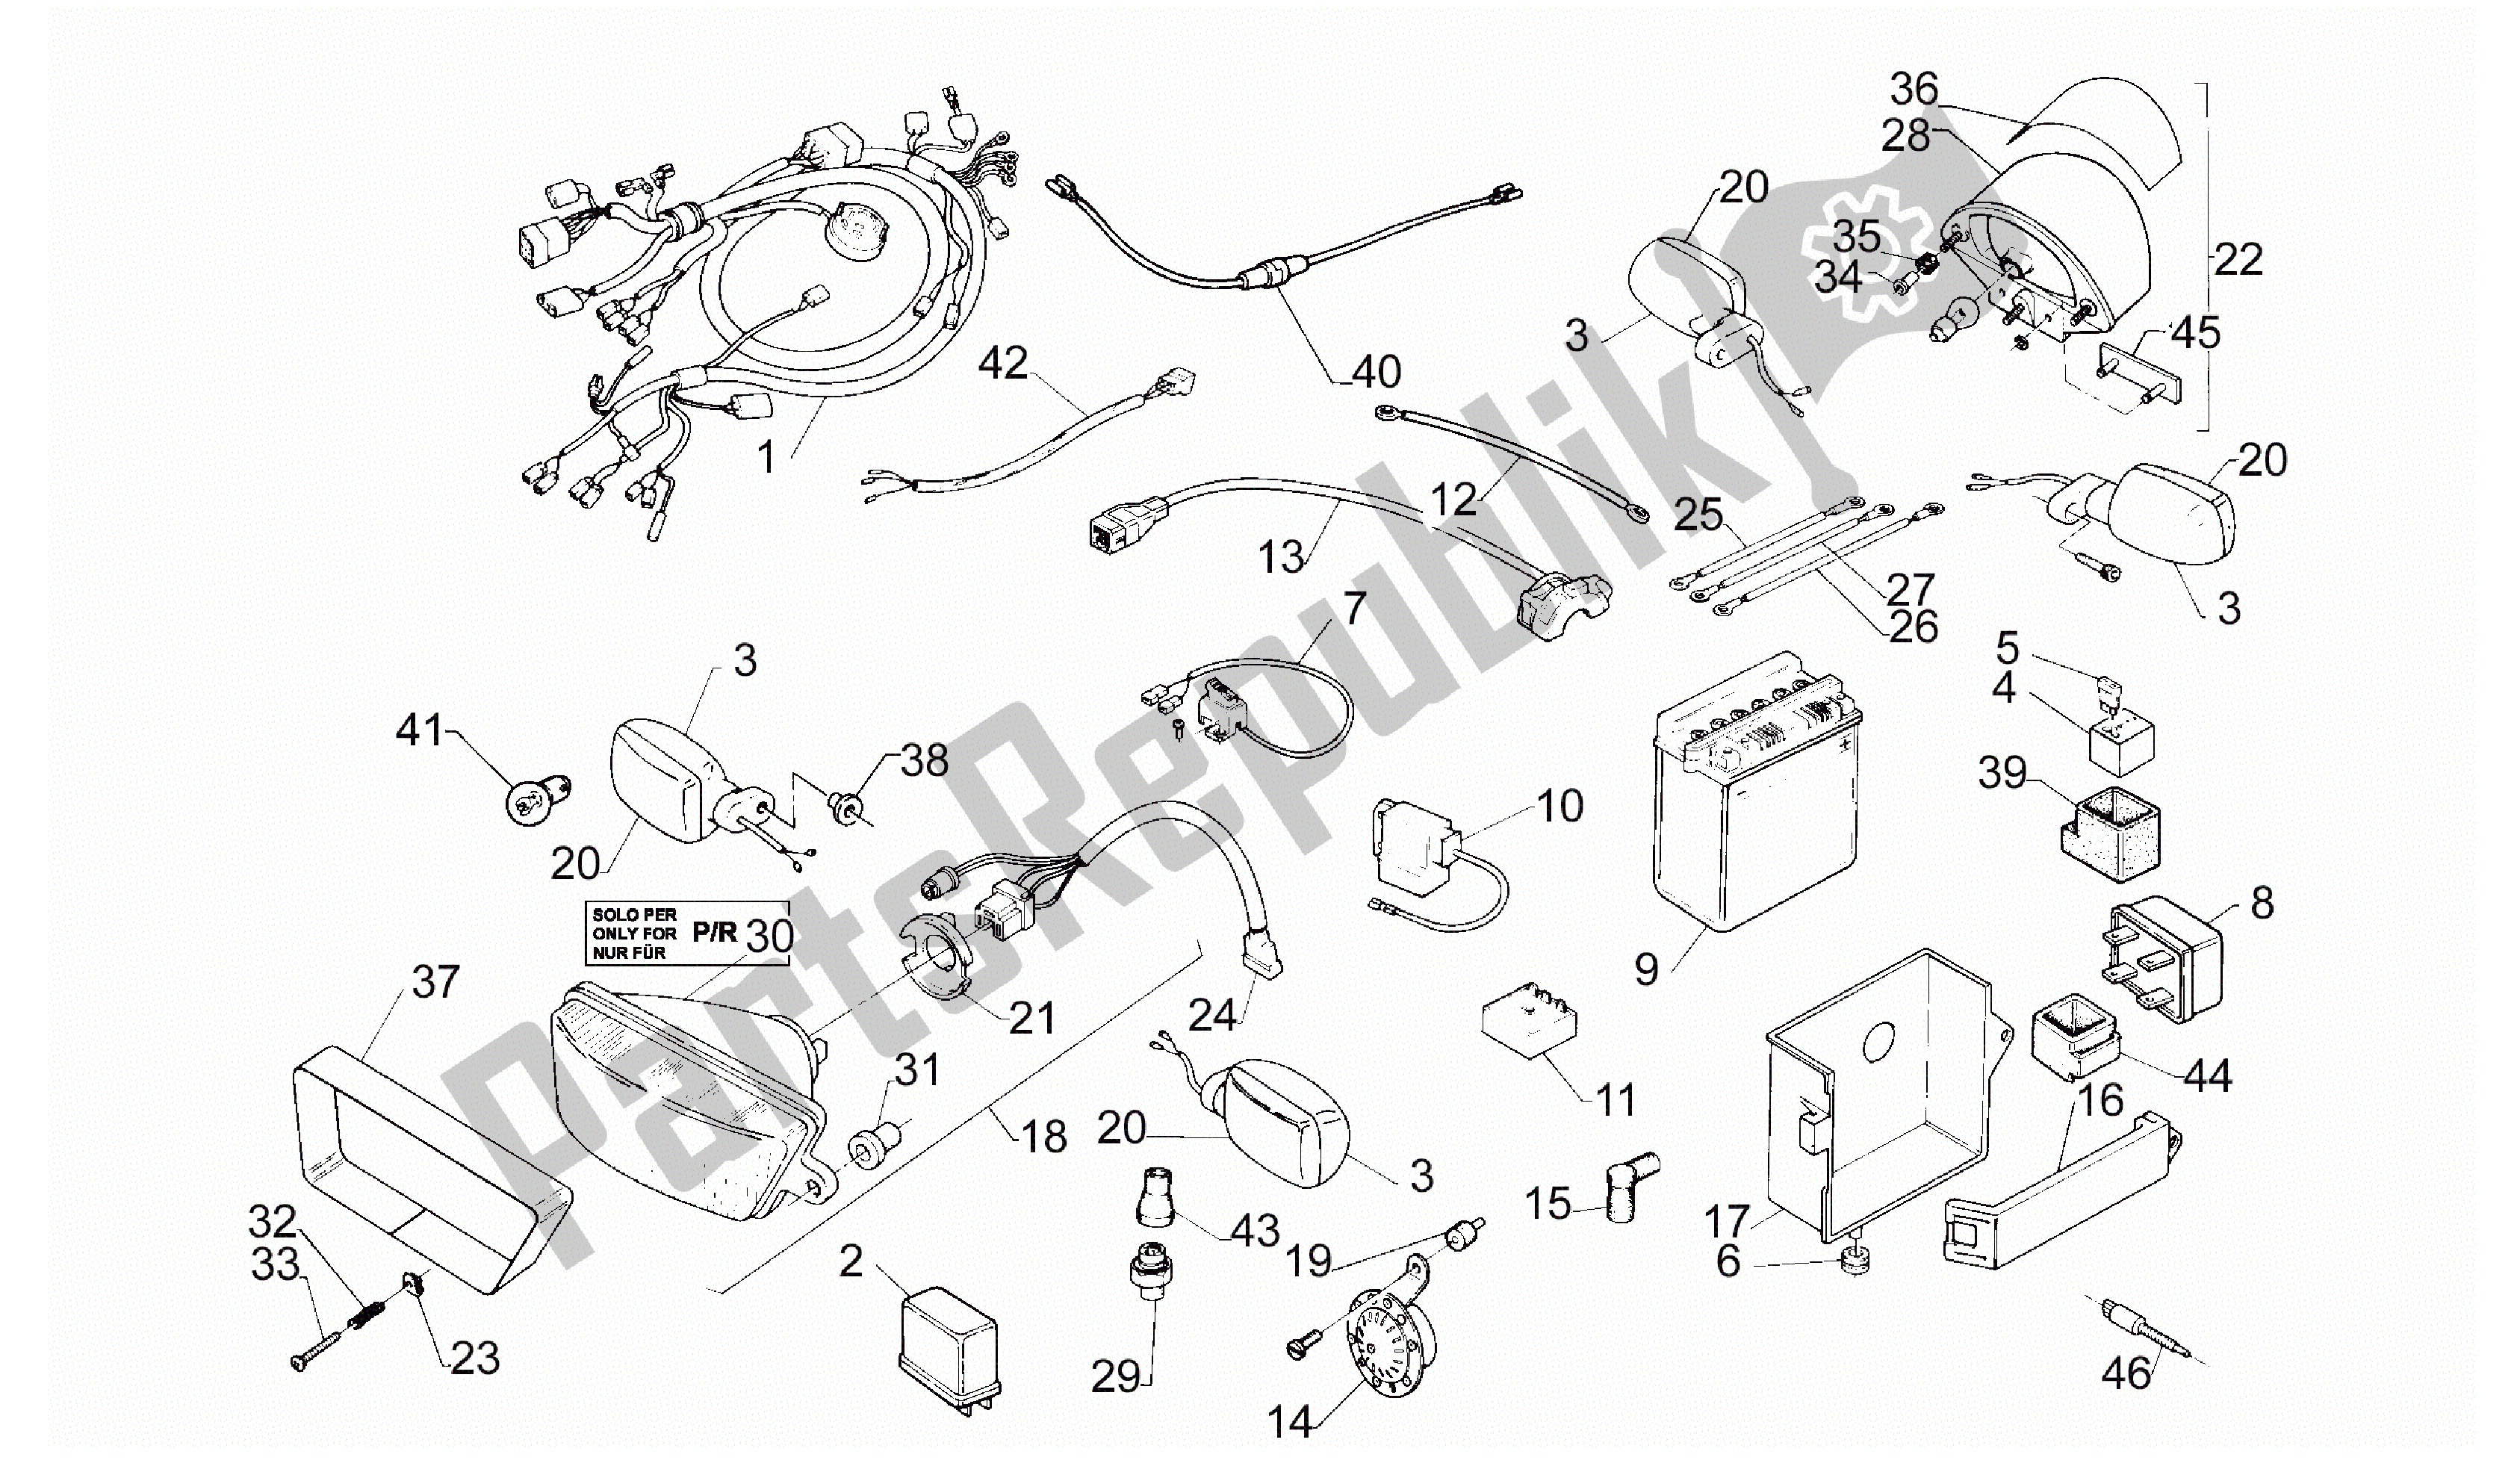 All parts for the Electrical System of the Aprilia RS 50 1993 - 1995